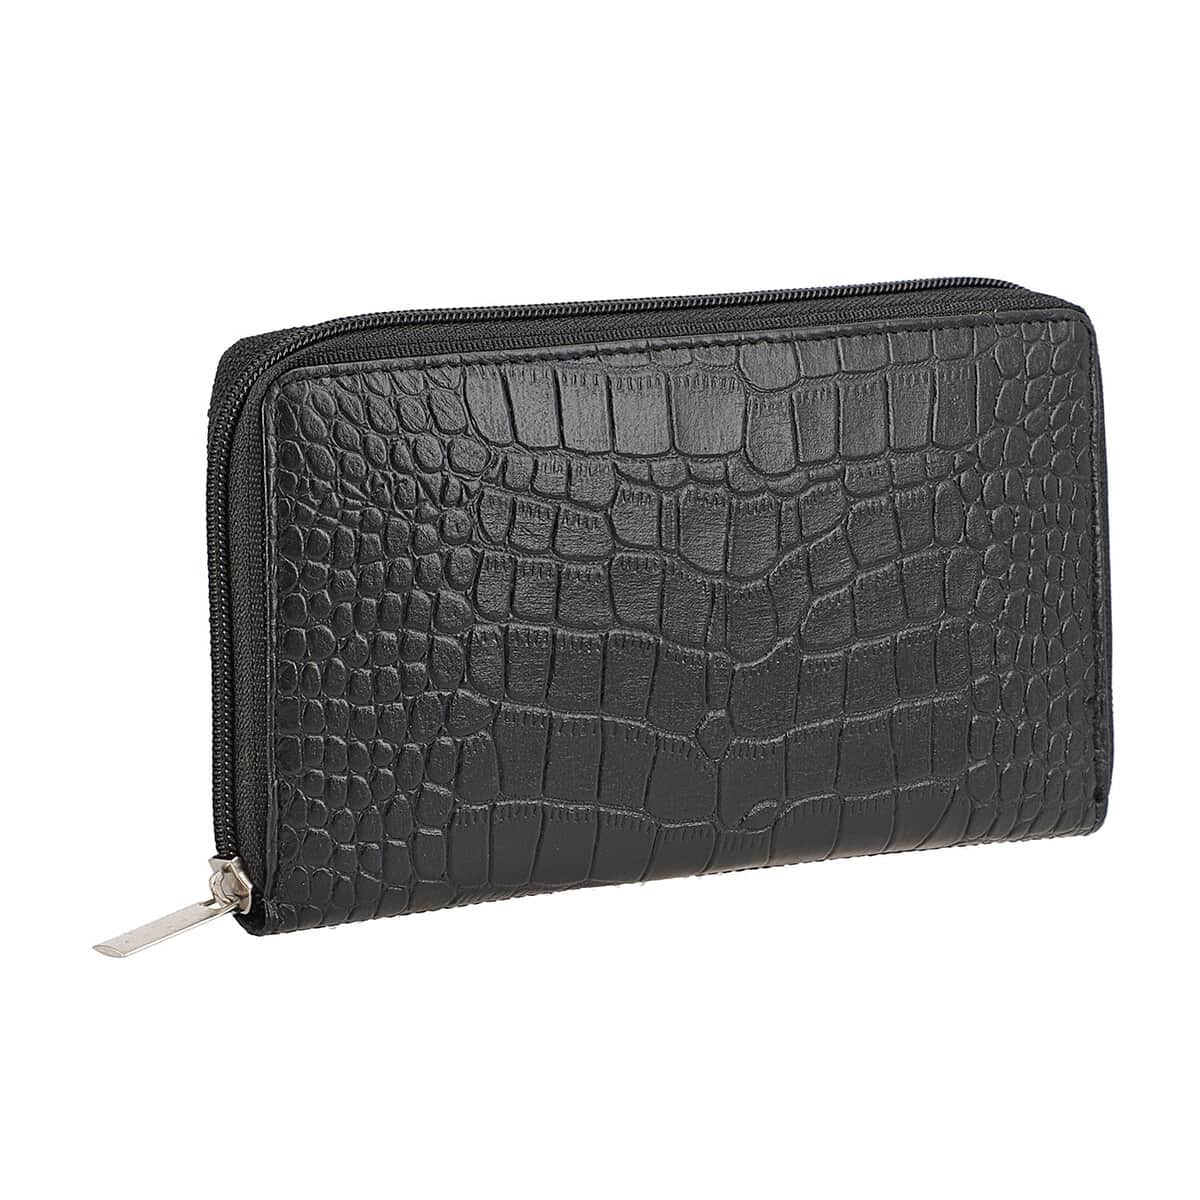 "100% Genuine Leather Wallet SIZE: 7.5(L)x4.5(W)x0.5(H) inches COLOR: Black" image number 2